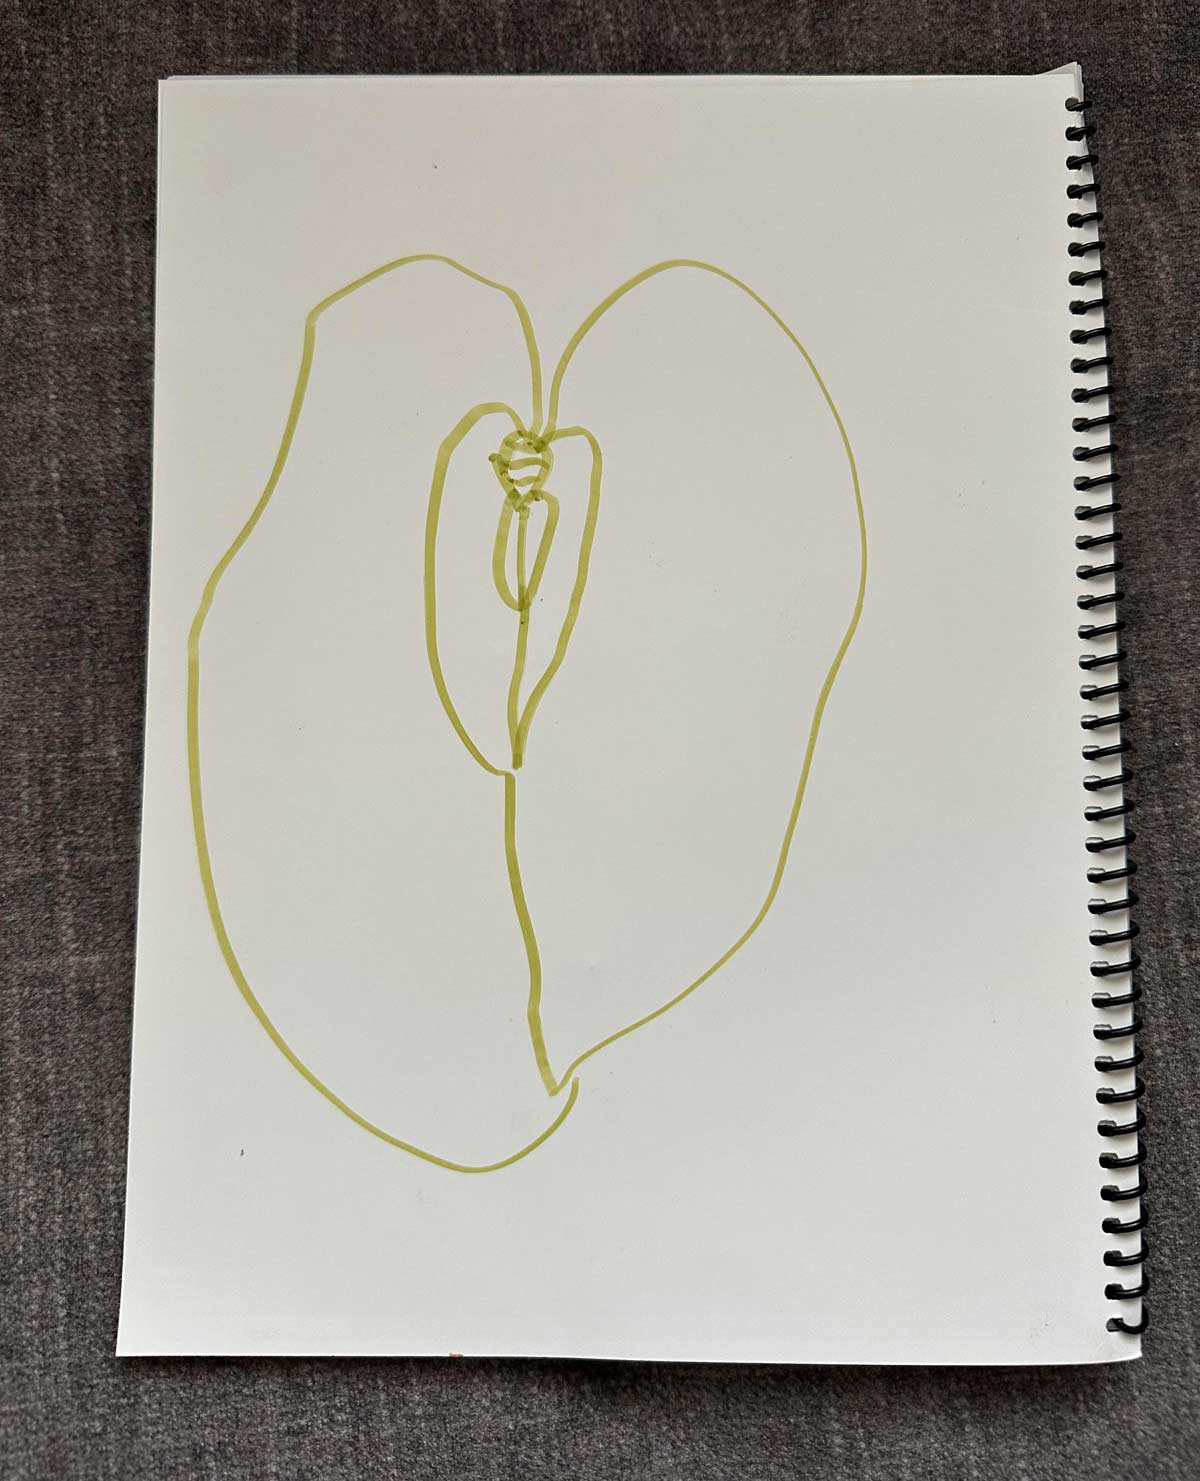 My 5 year old son drew a butterfly